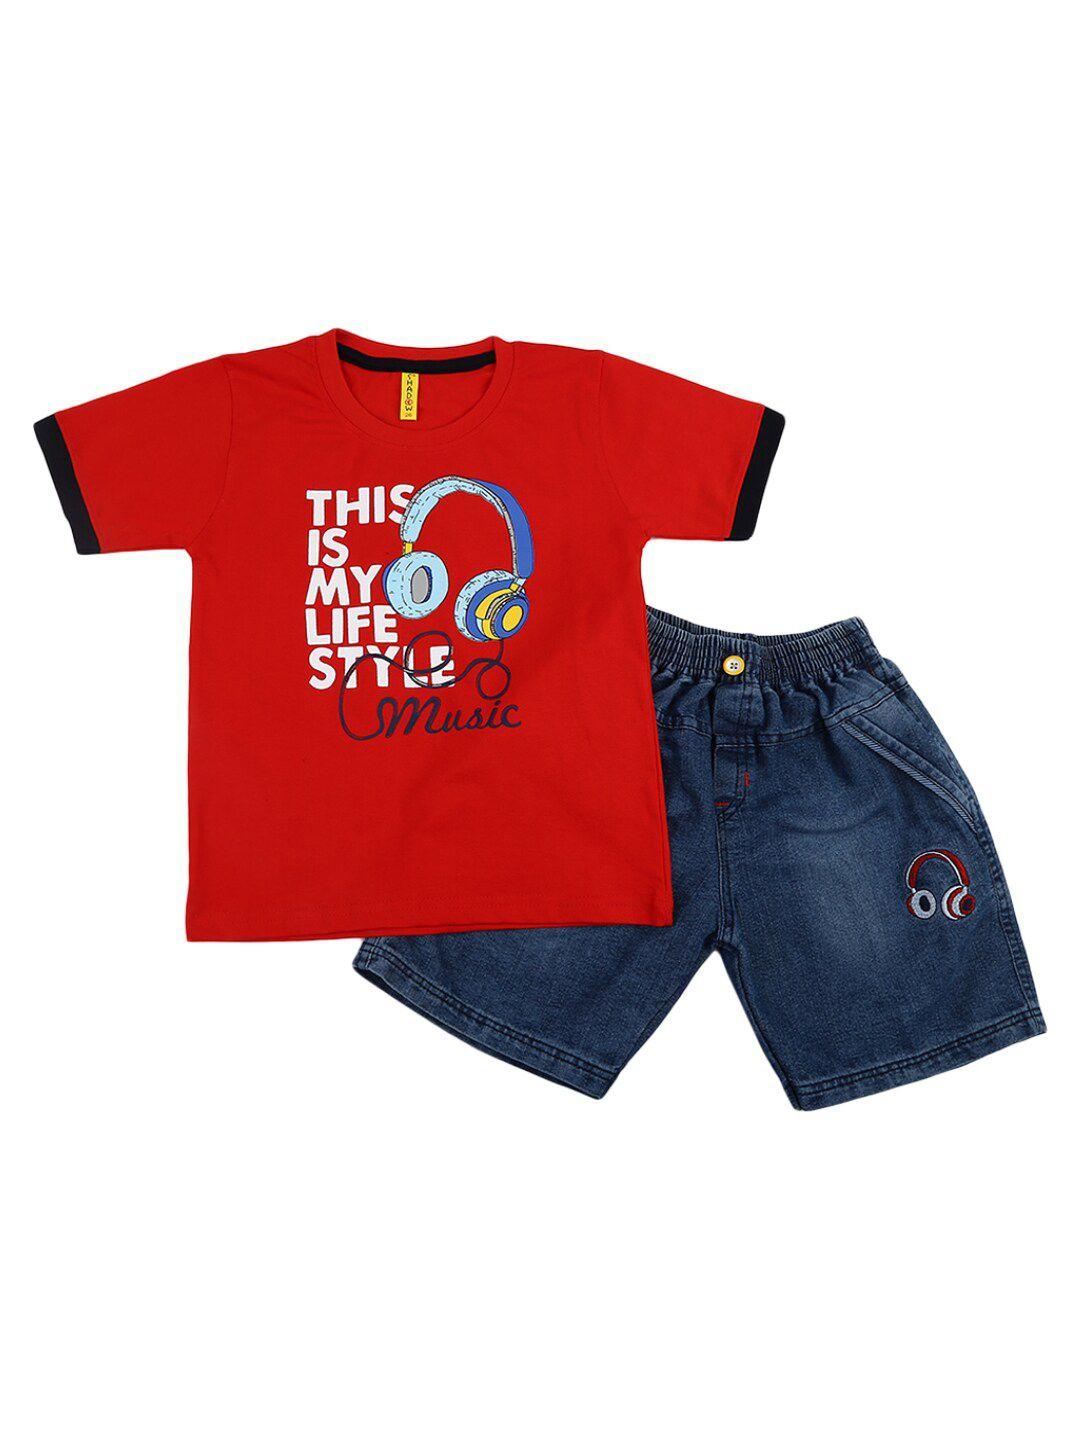 v-mart kids red printed t-shirt with shorts